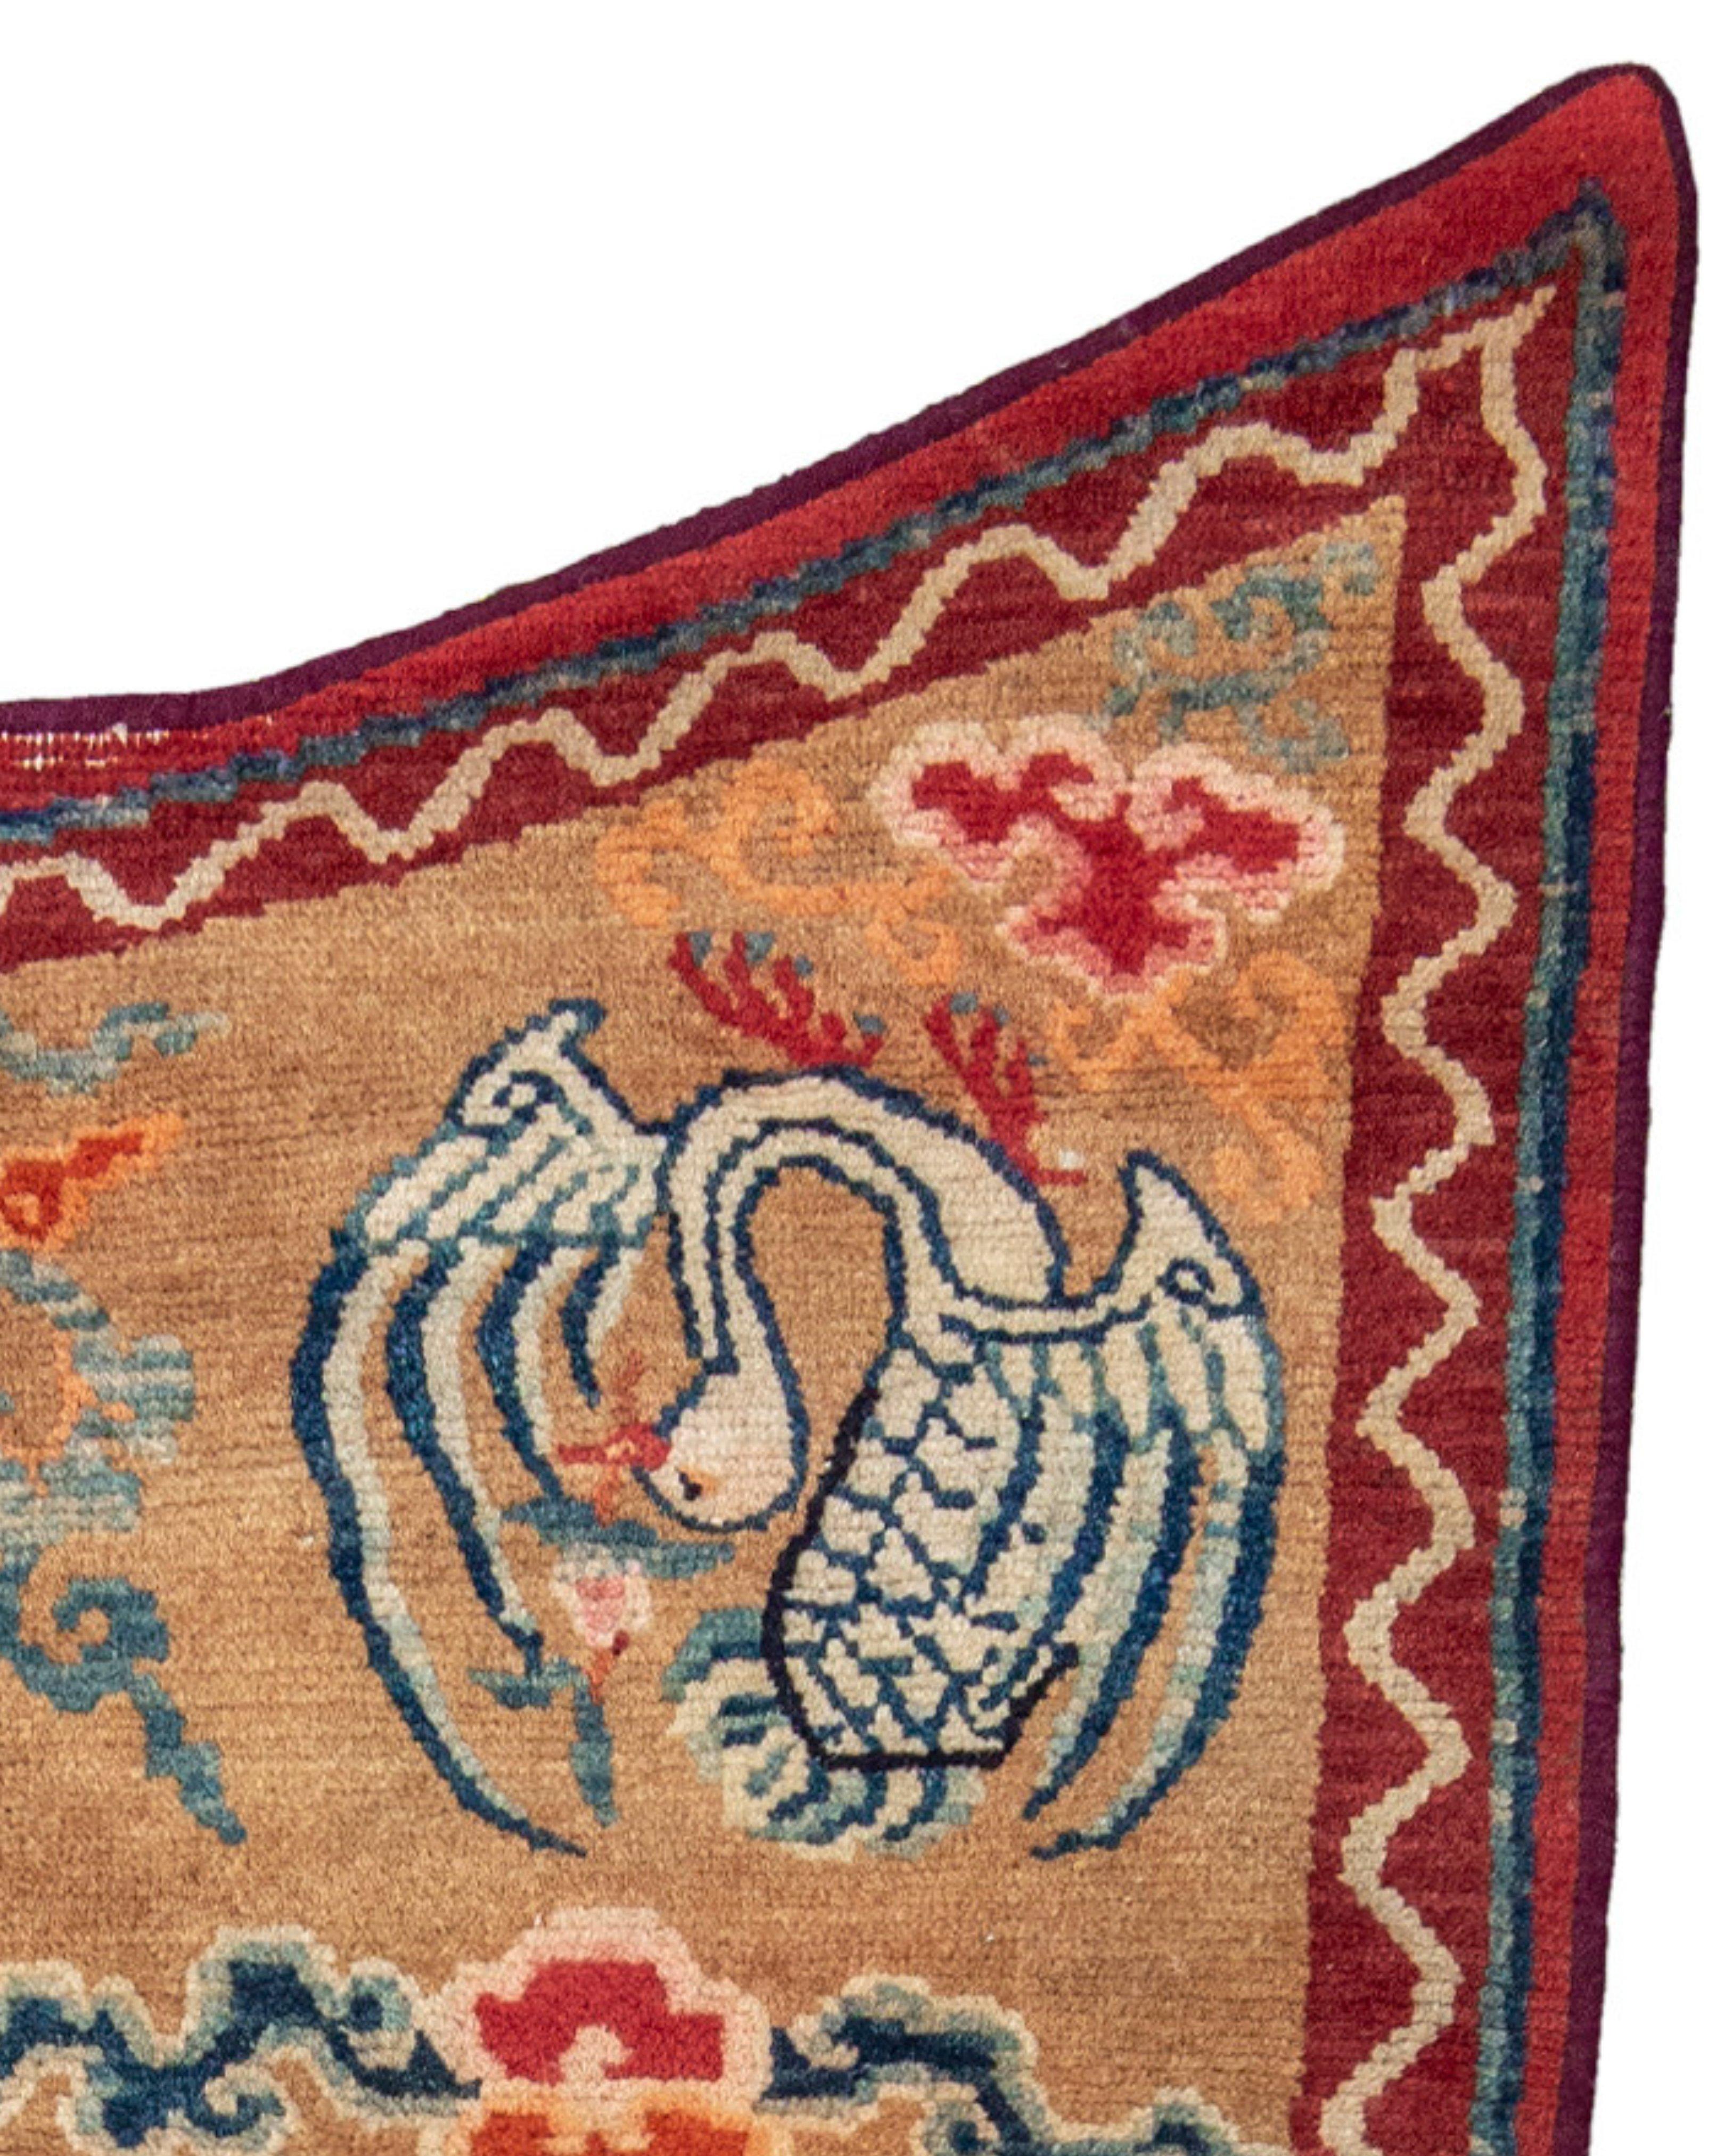 Tibetan Saddle Cover, Late 19th Century

Additional Information:
Dimensions: 3'8